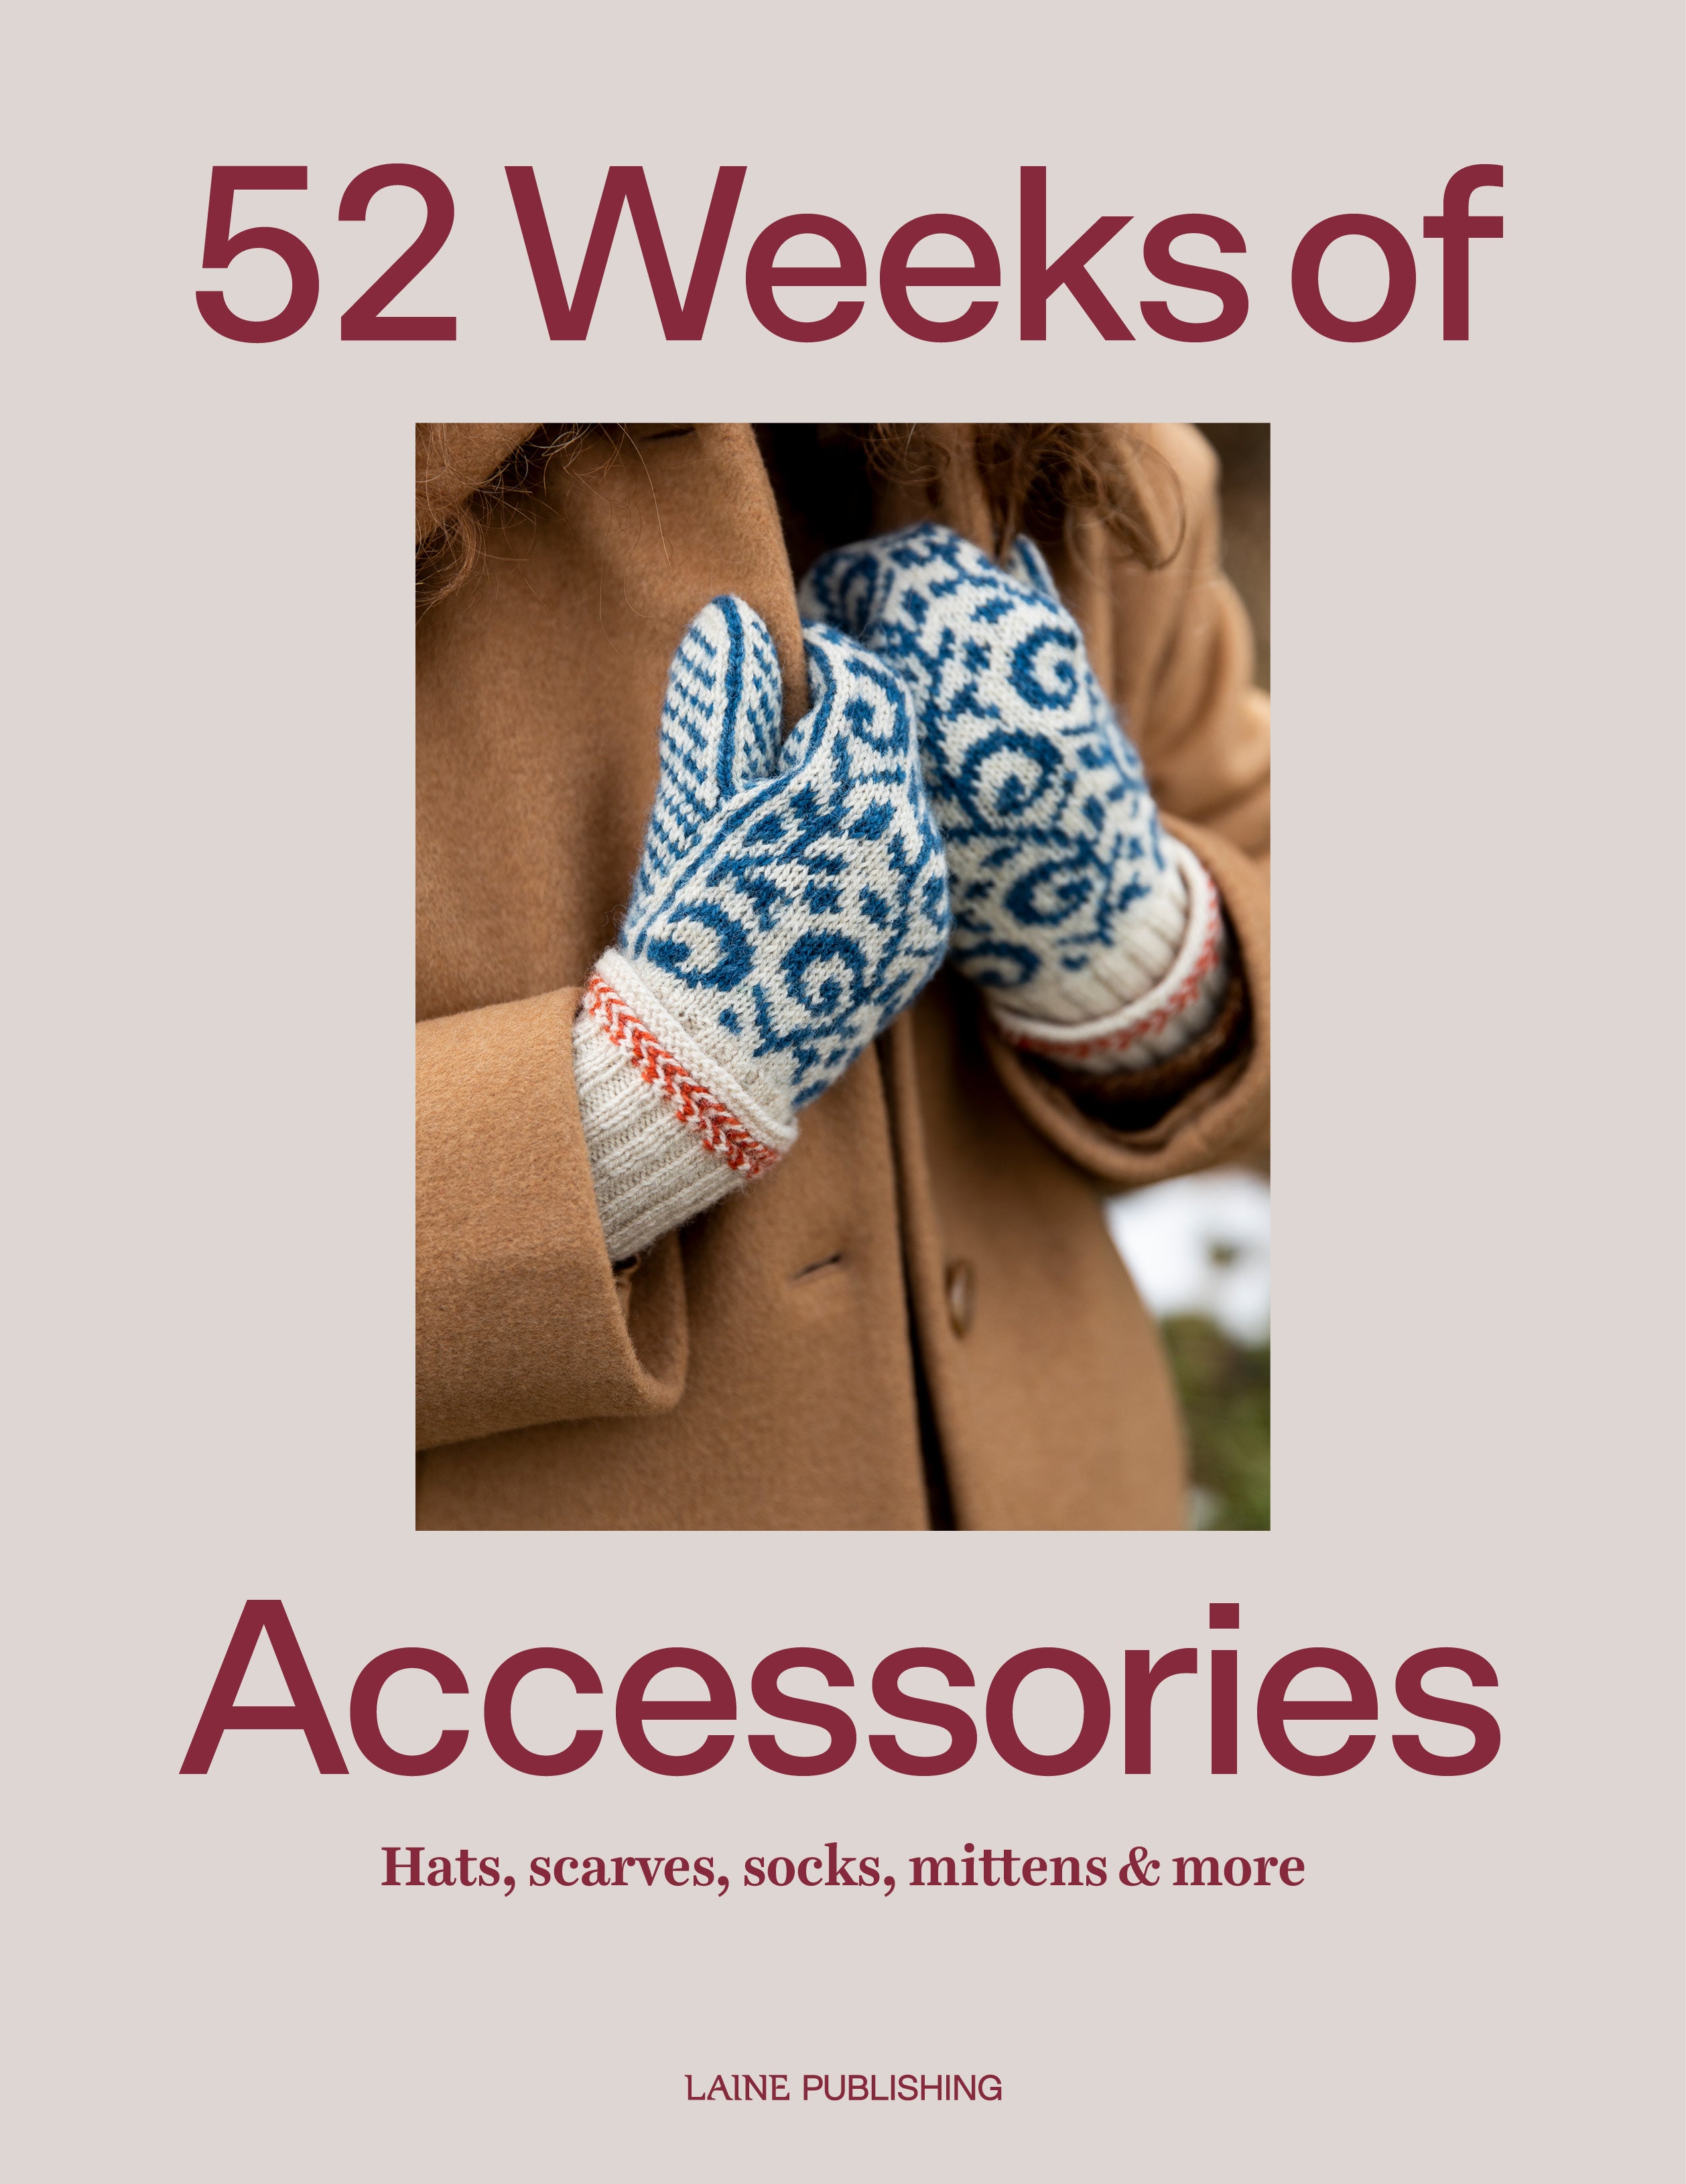 Laine Publishing - 52 Weeks of Accessories